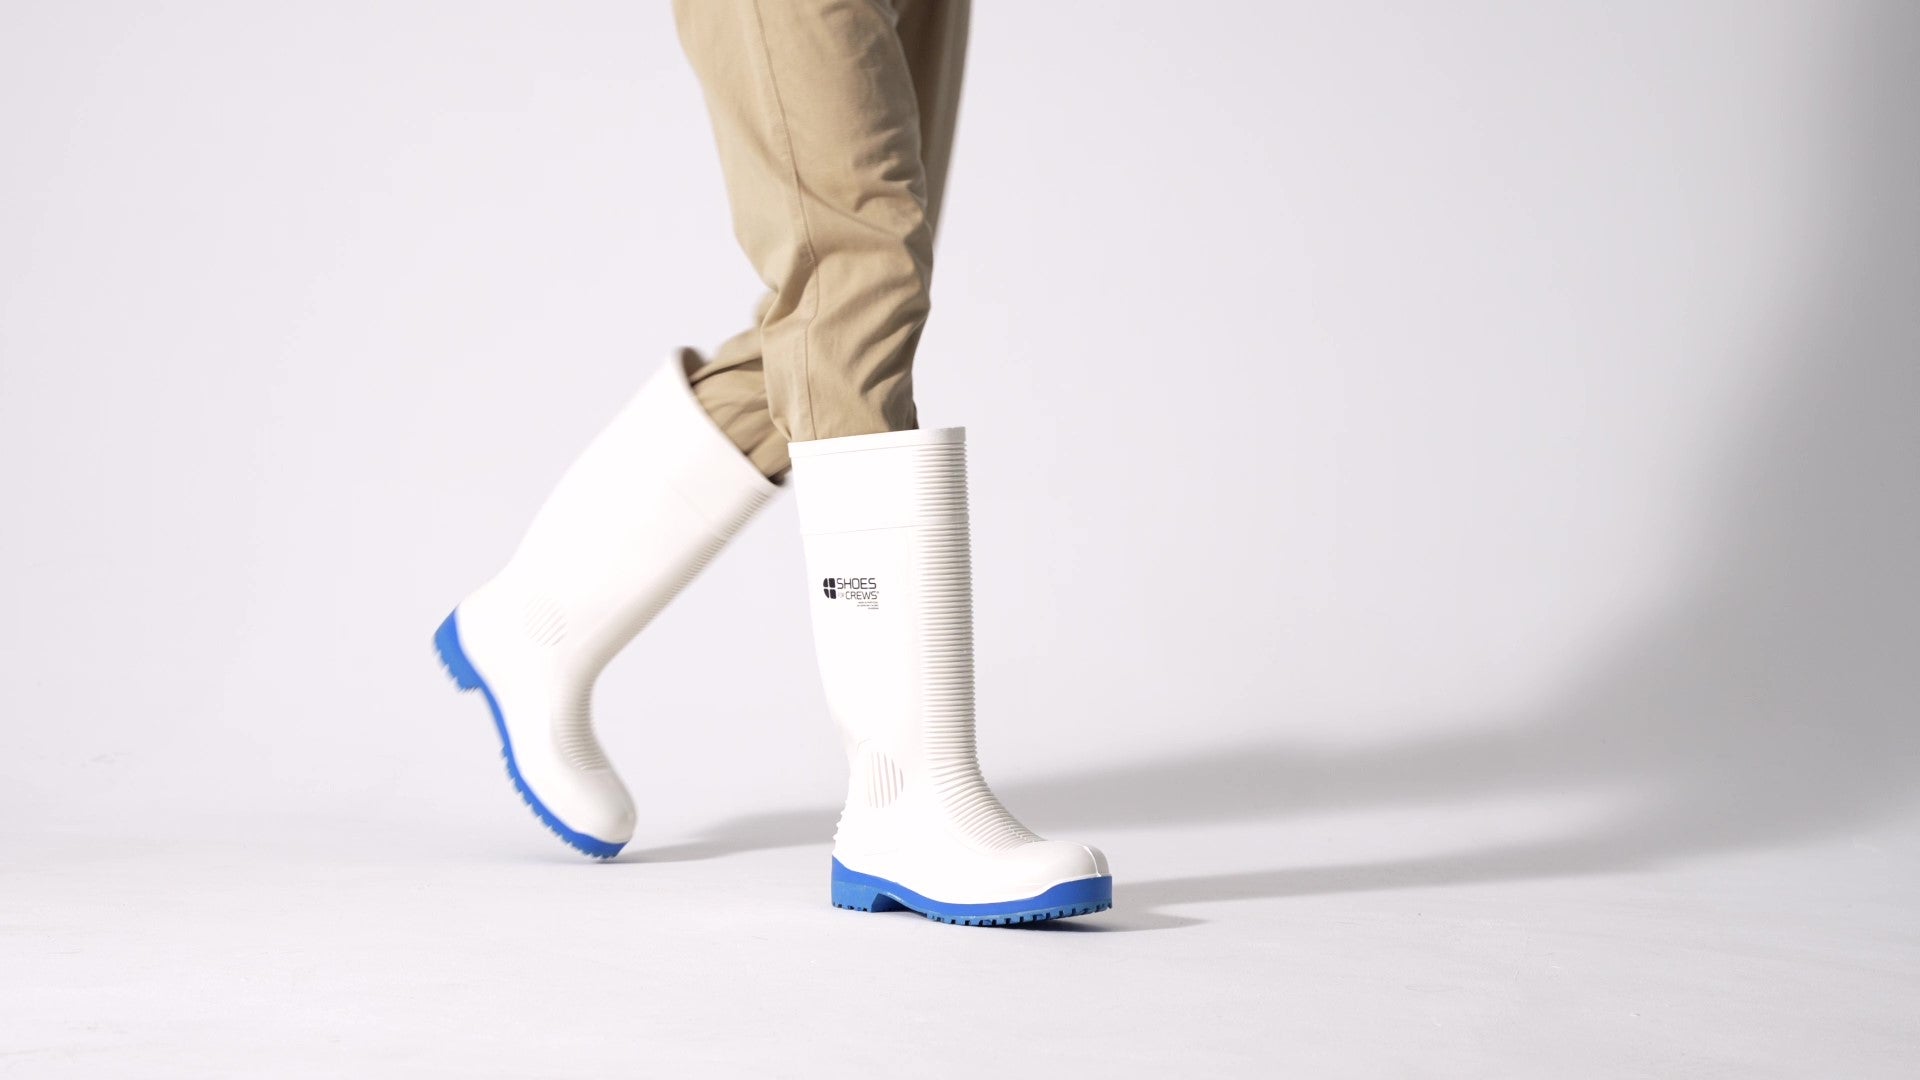 The Guardian S4 from Shoes For Crews are waterproof Wellington boots that offer superior slip resistance on a variety of pavement surfaces, product video.